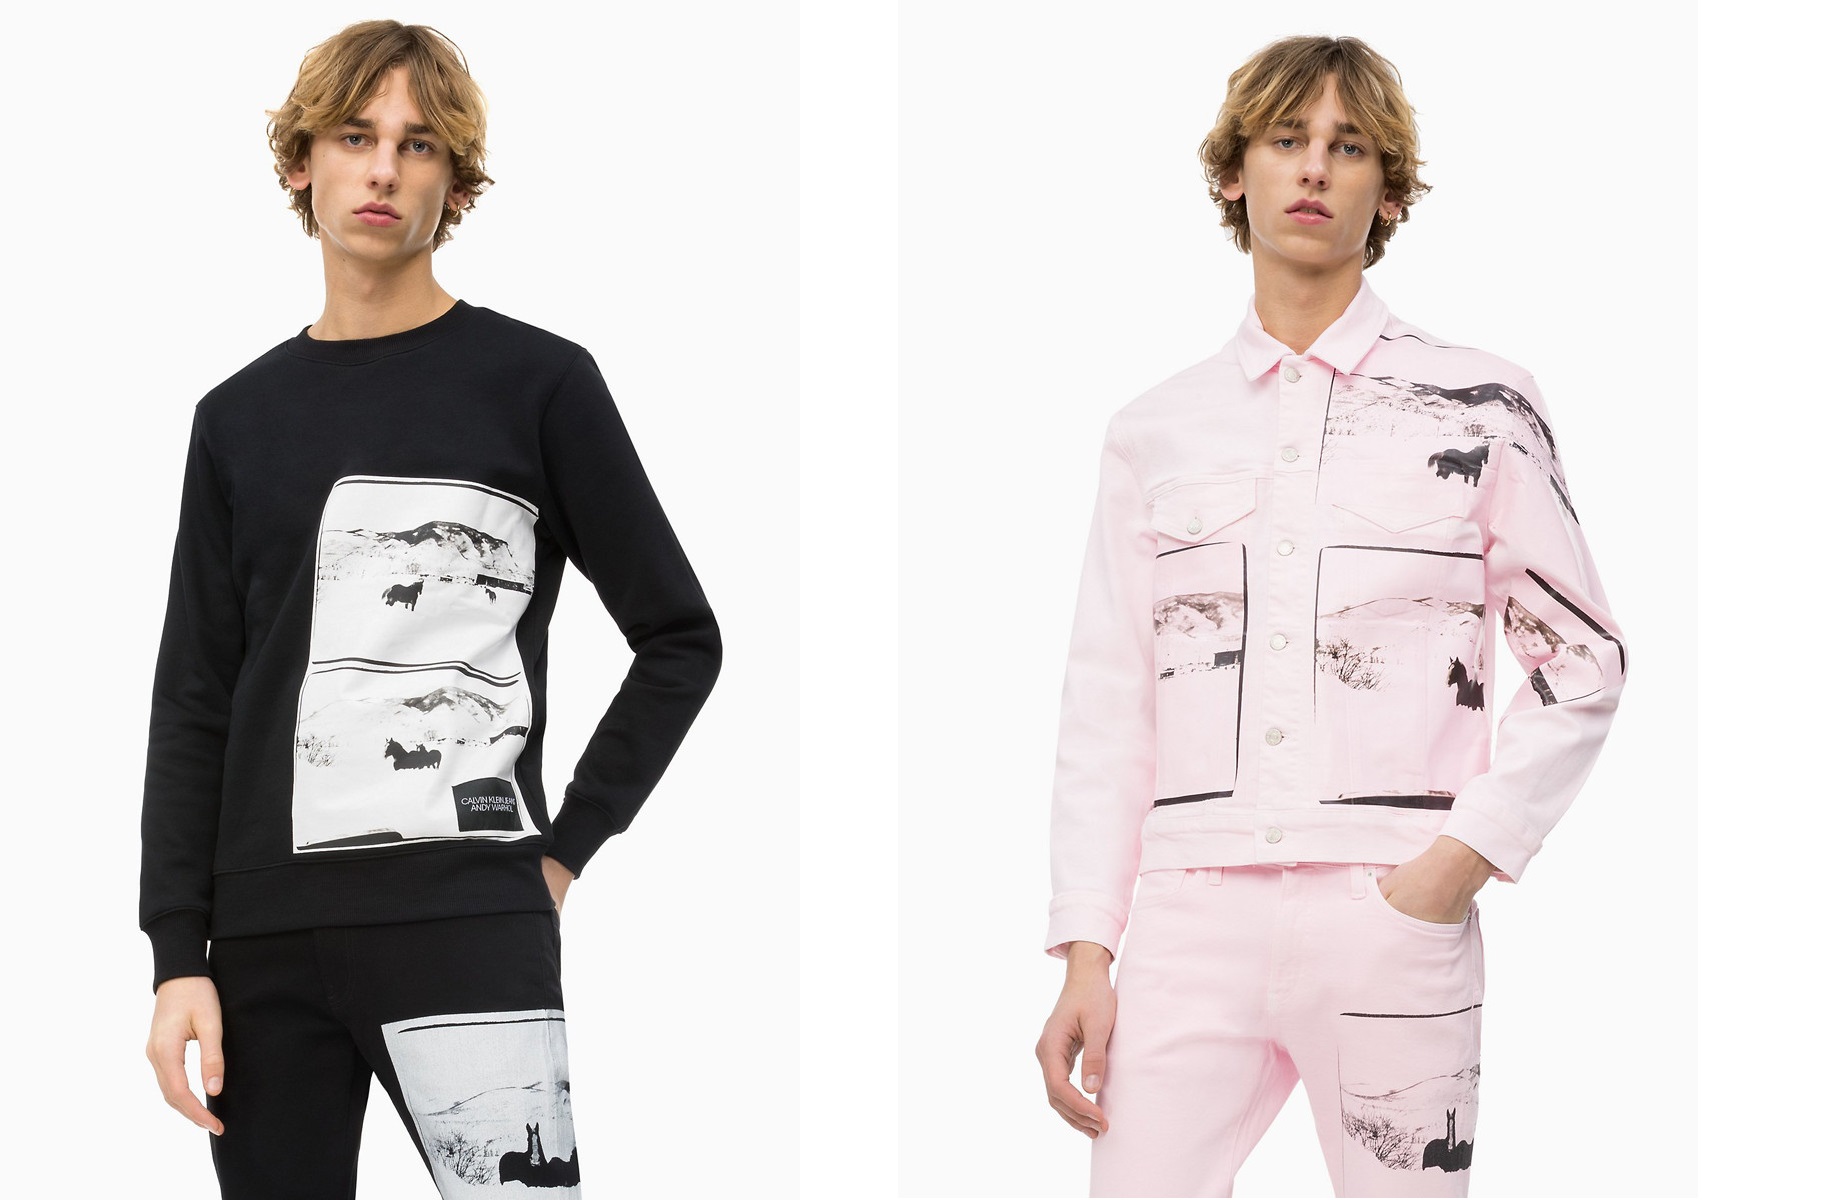 Calvin Klein Drops New Andy Warhol “Landscapes” Collection